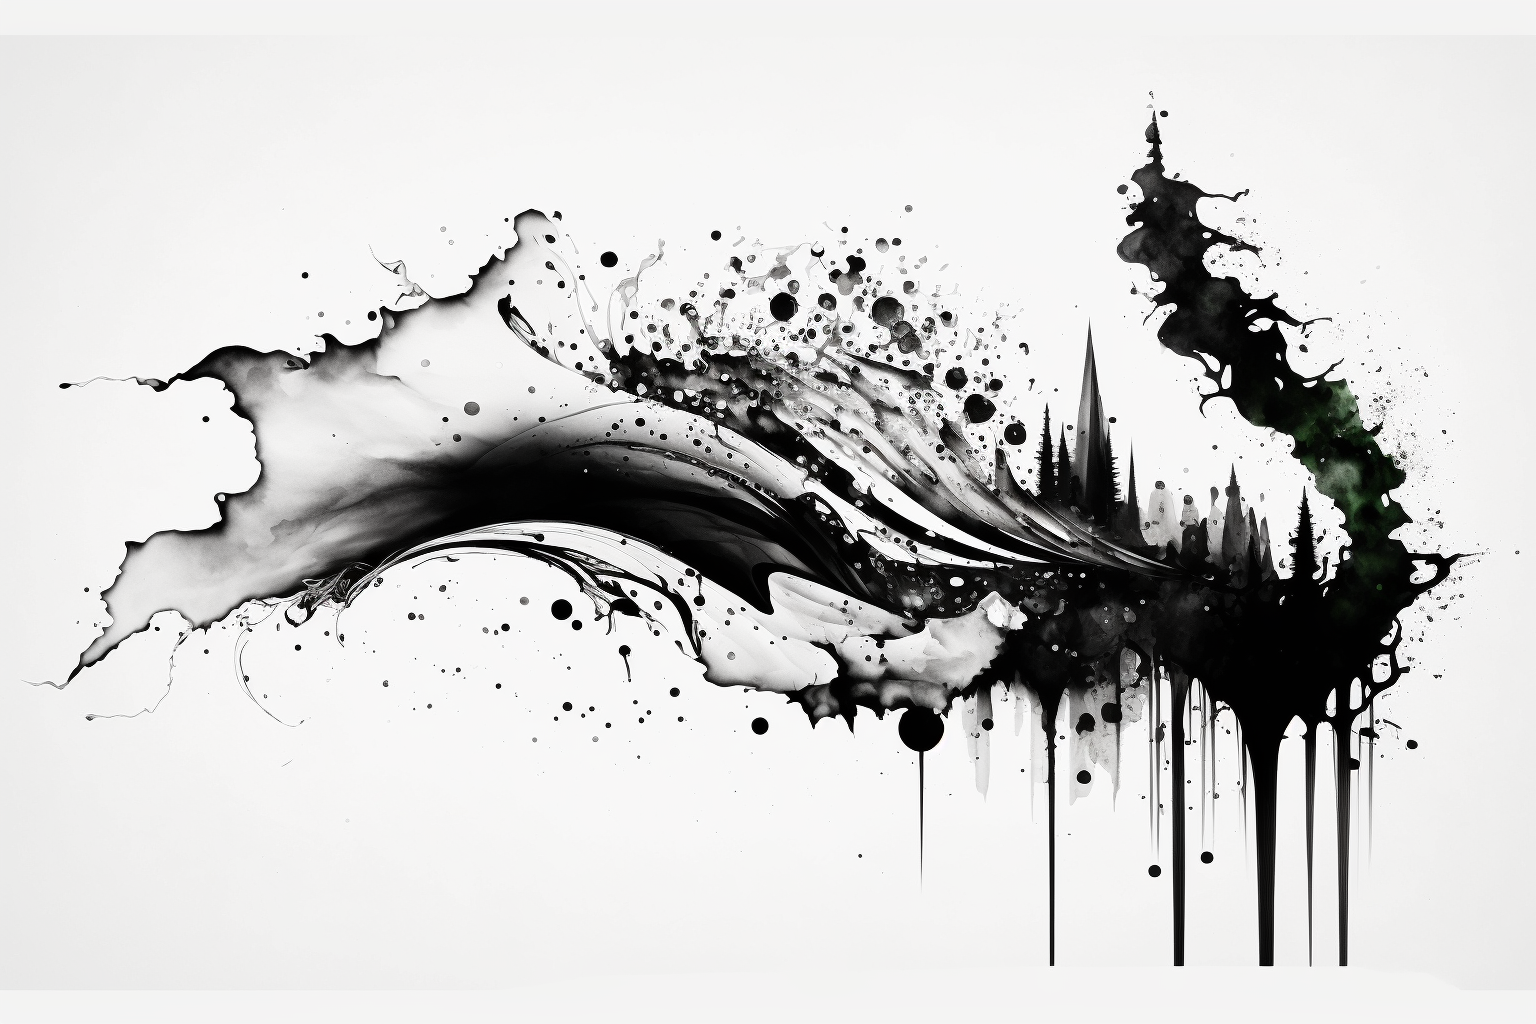 An abstract black and white watercolor of splashes of water with trees in the background